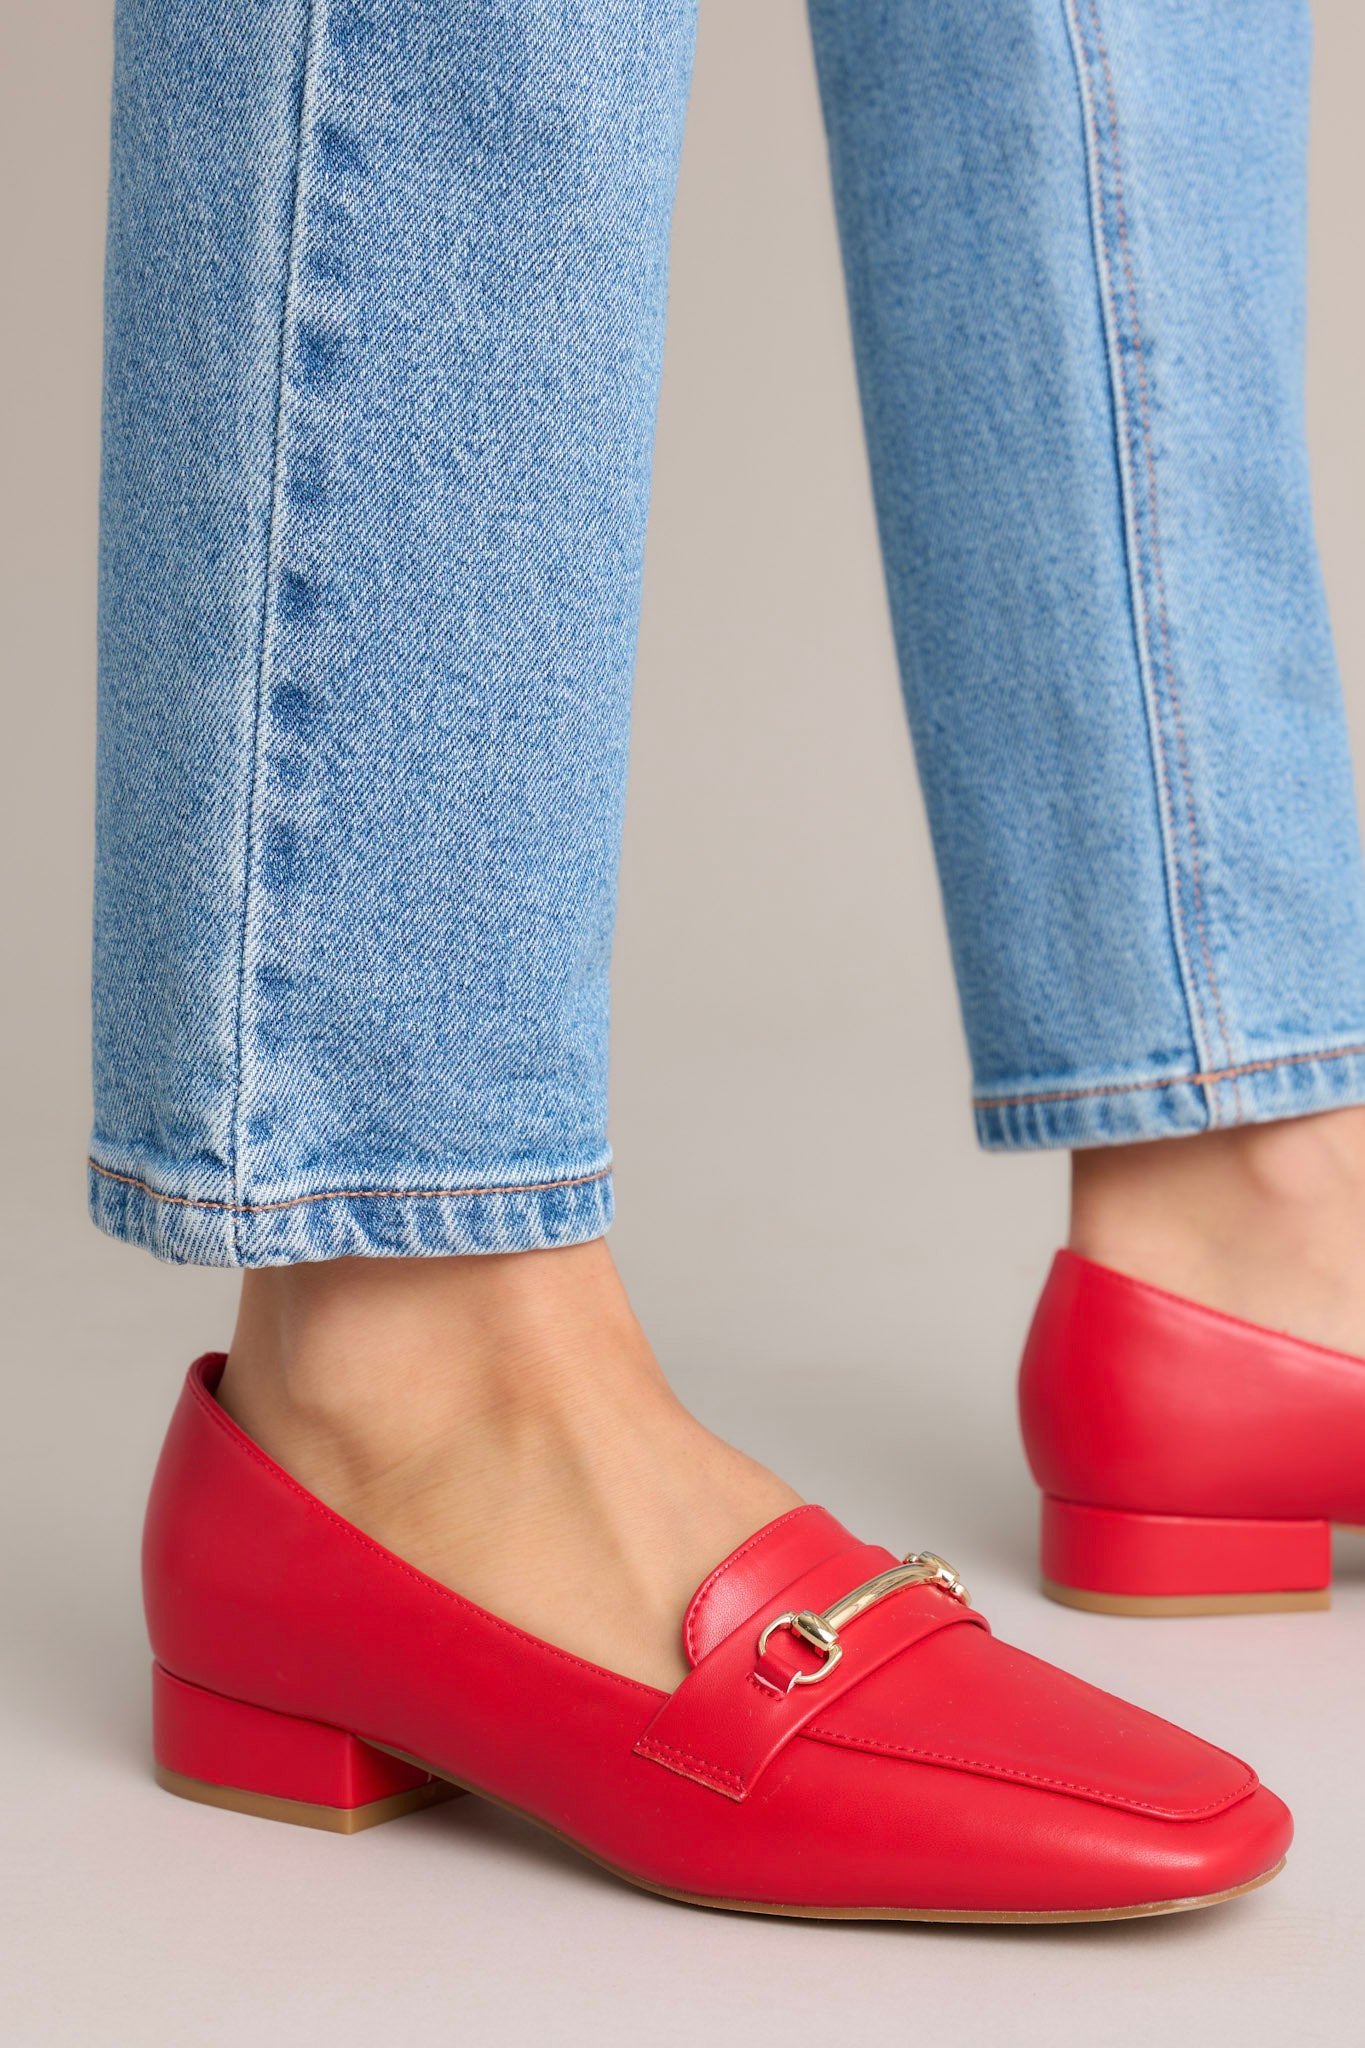 Close up view of these red loafers that feature a slip on design, a small heel, a square toe, and gold hardware.